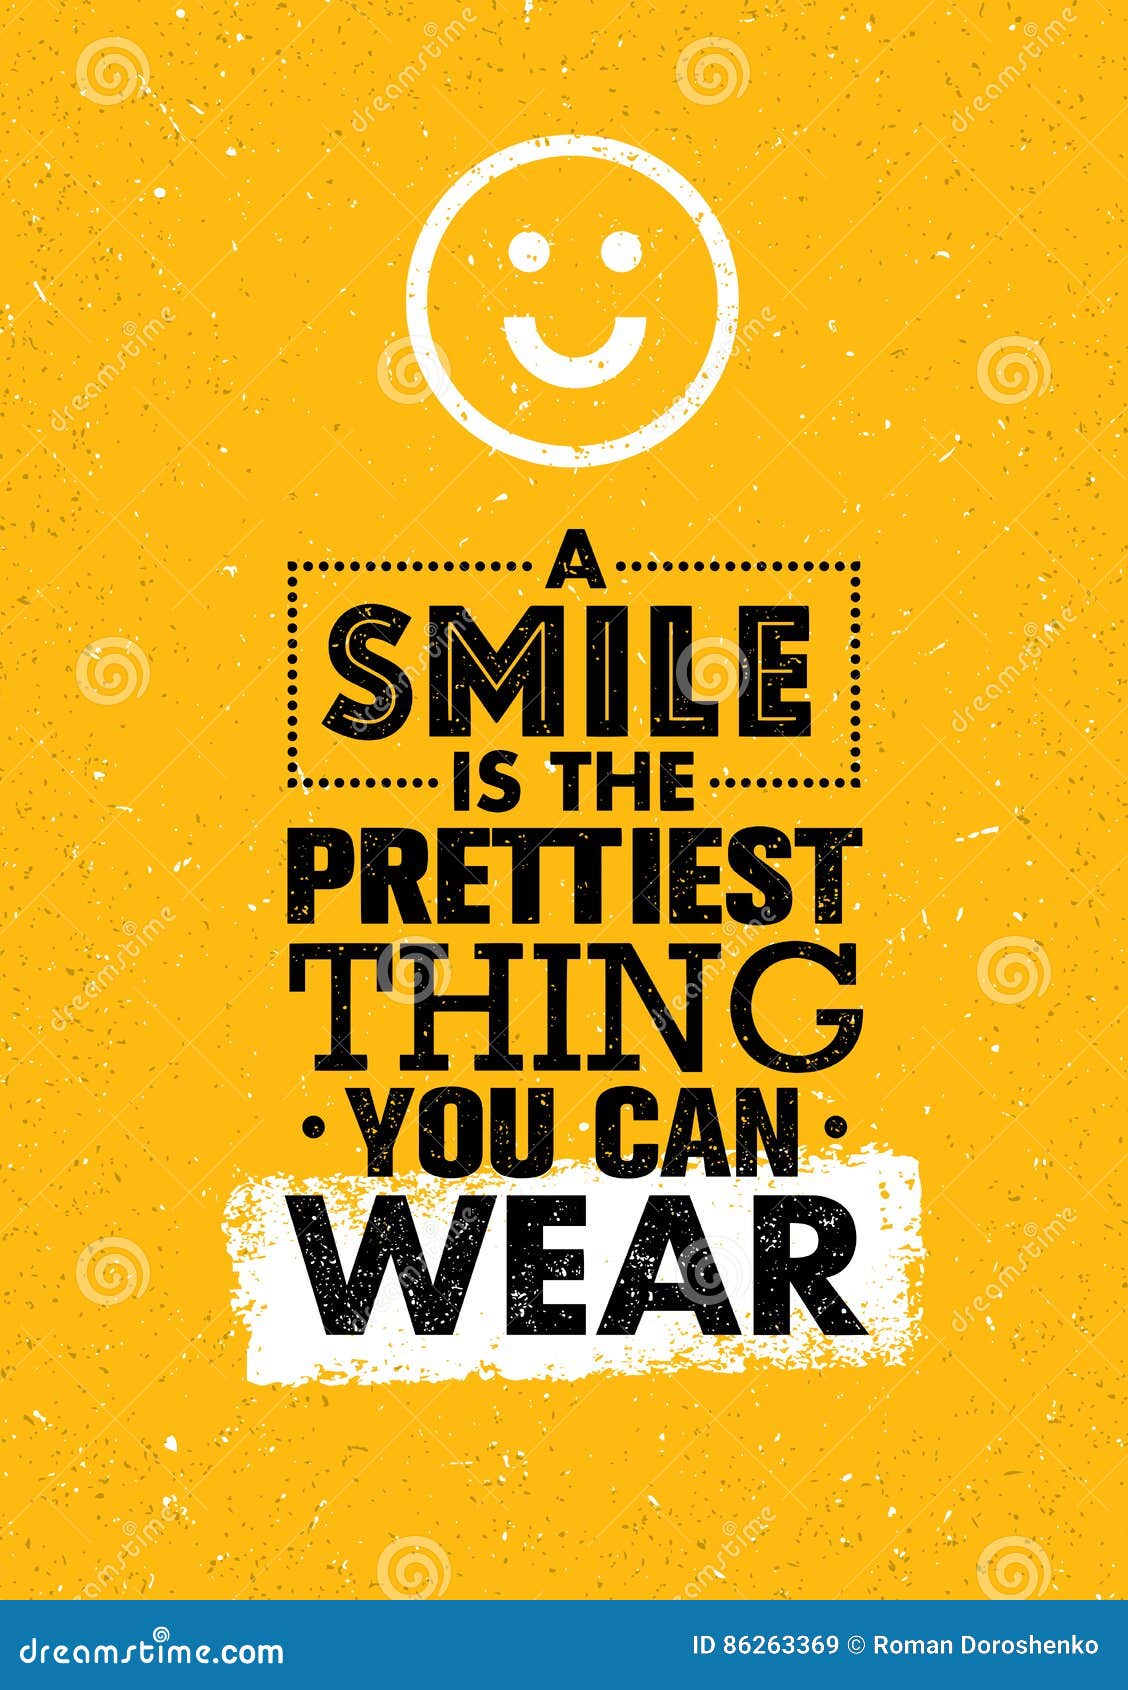 A Smile Is The Prettiest Thing You Can Wear. Positive Inspiring Creative  Motivation Quote. Vector Banner Design Concept Stock Vector - Illustration  Of Sayings, Frame: 86263369